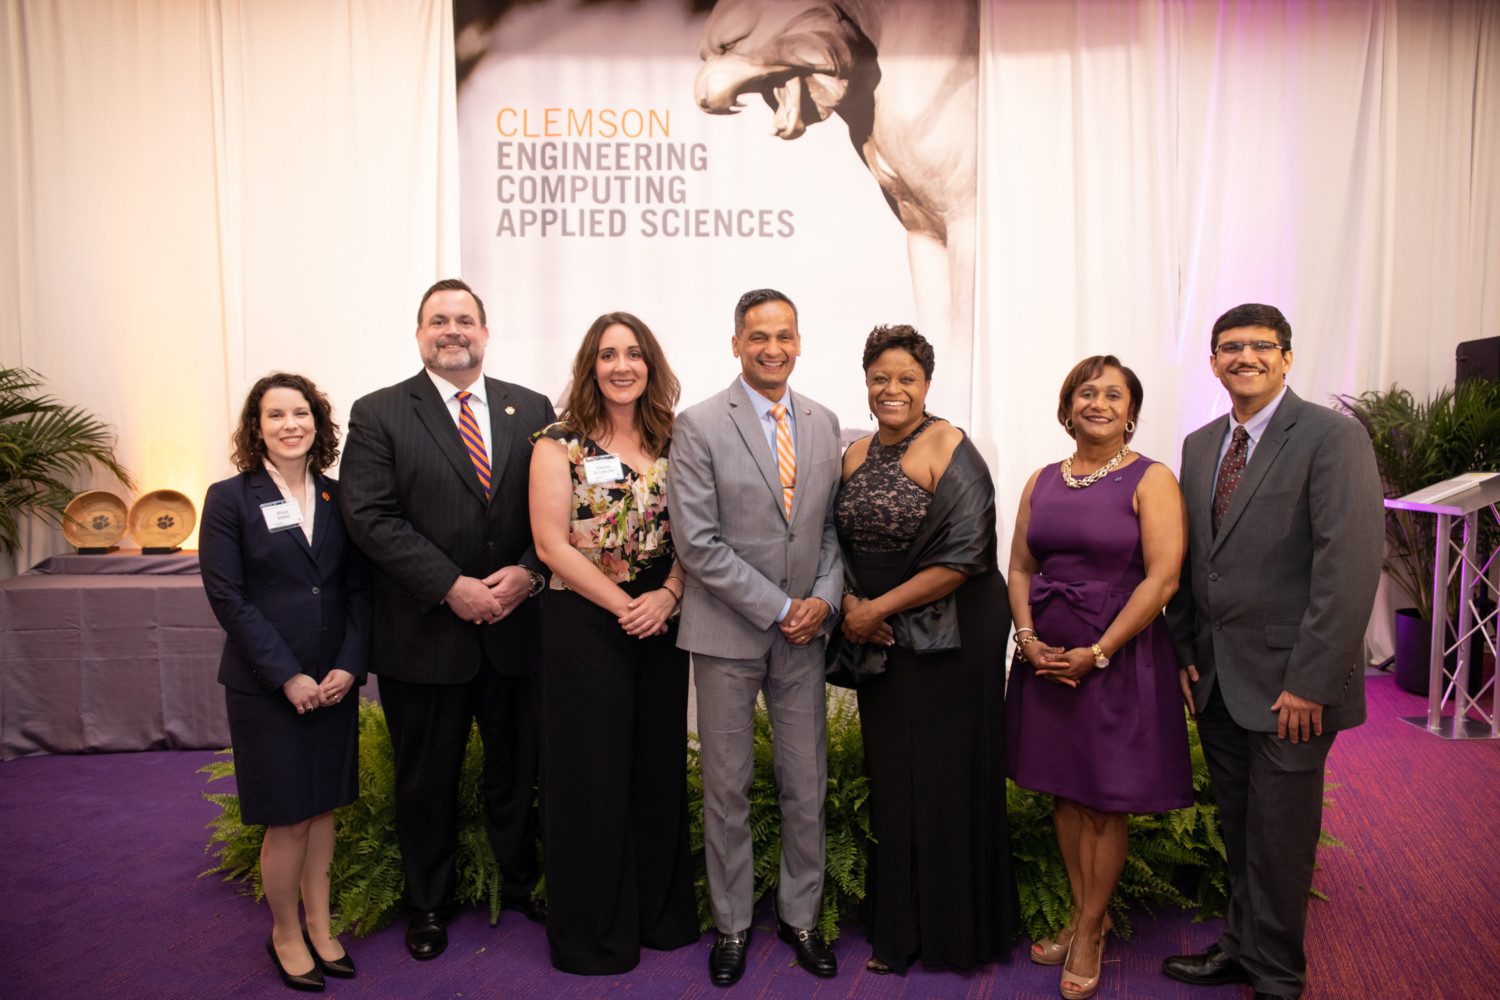 The 2019 honorees posed for a picture with Dean Anand Gramopadhye after a gala at Memorial Stadium. Those pictured are (from left): Allison Godwin, I.V. Hall, Chelsea L. Ex-Lubeskie, Gramopadhye, Denise Rutledge Simmons, Vanessa Ellerbe Wyche and Amol V. Janorkar.